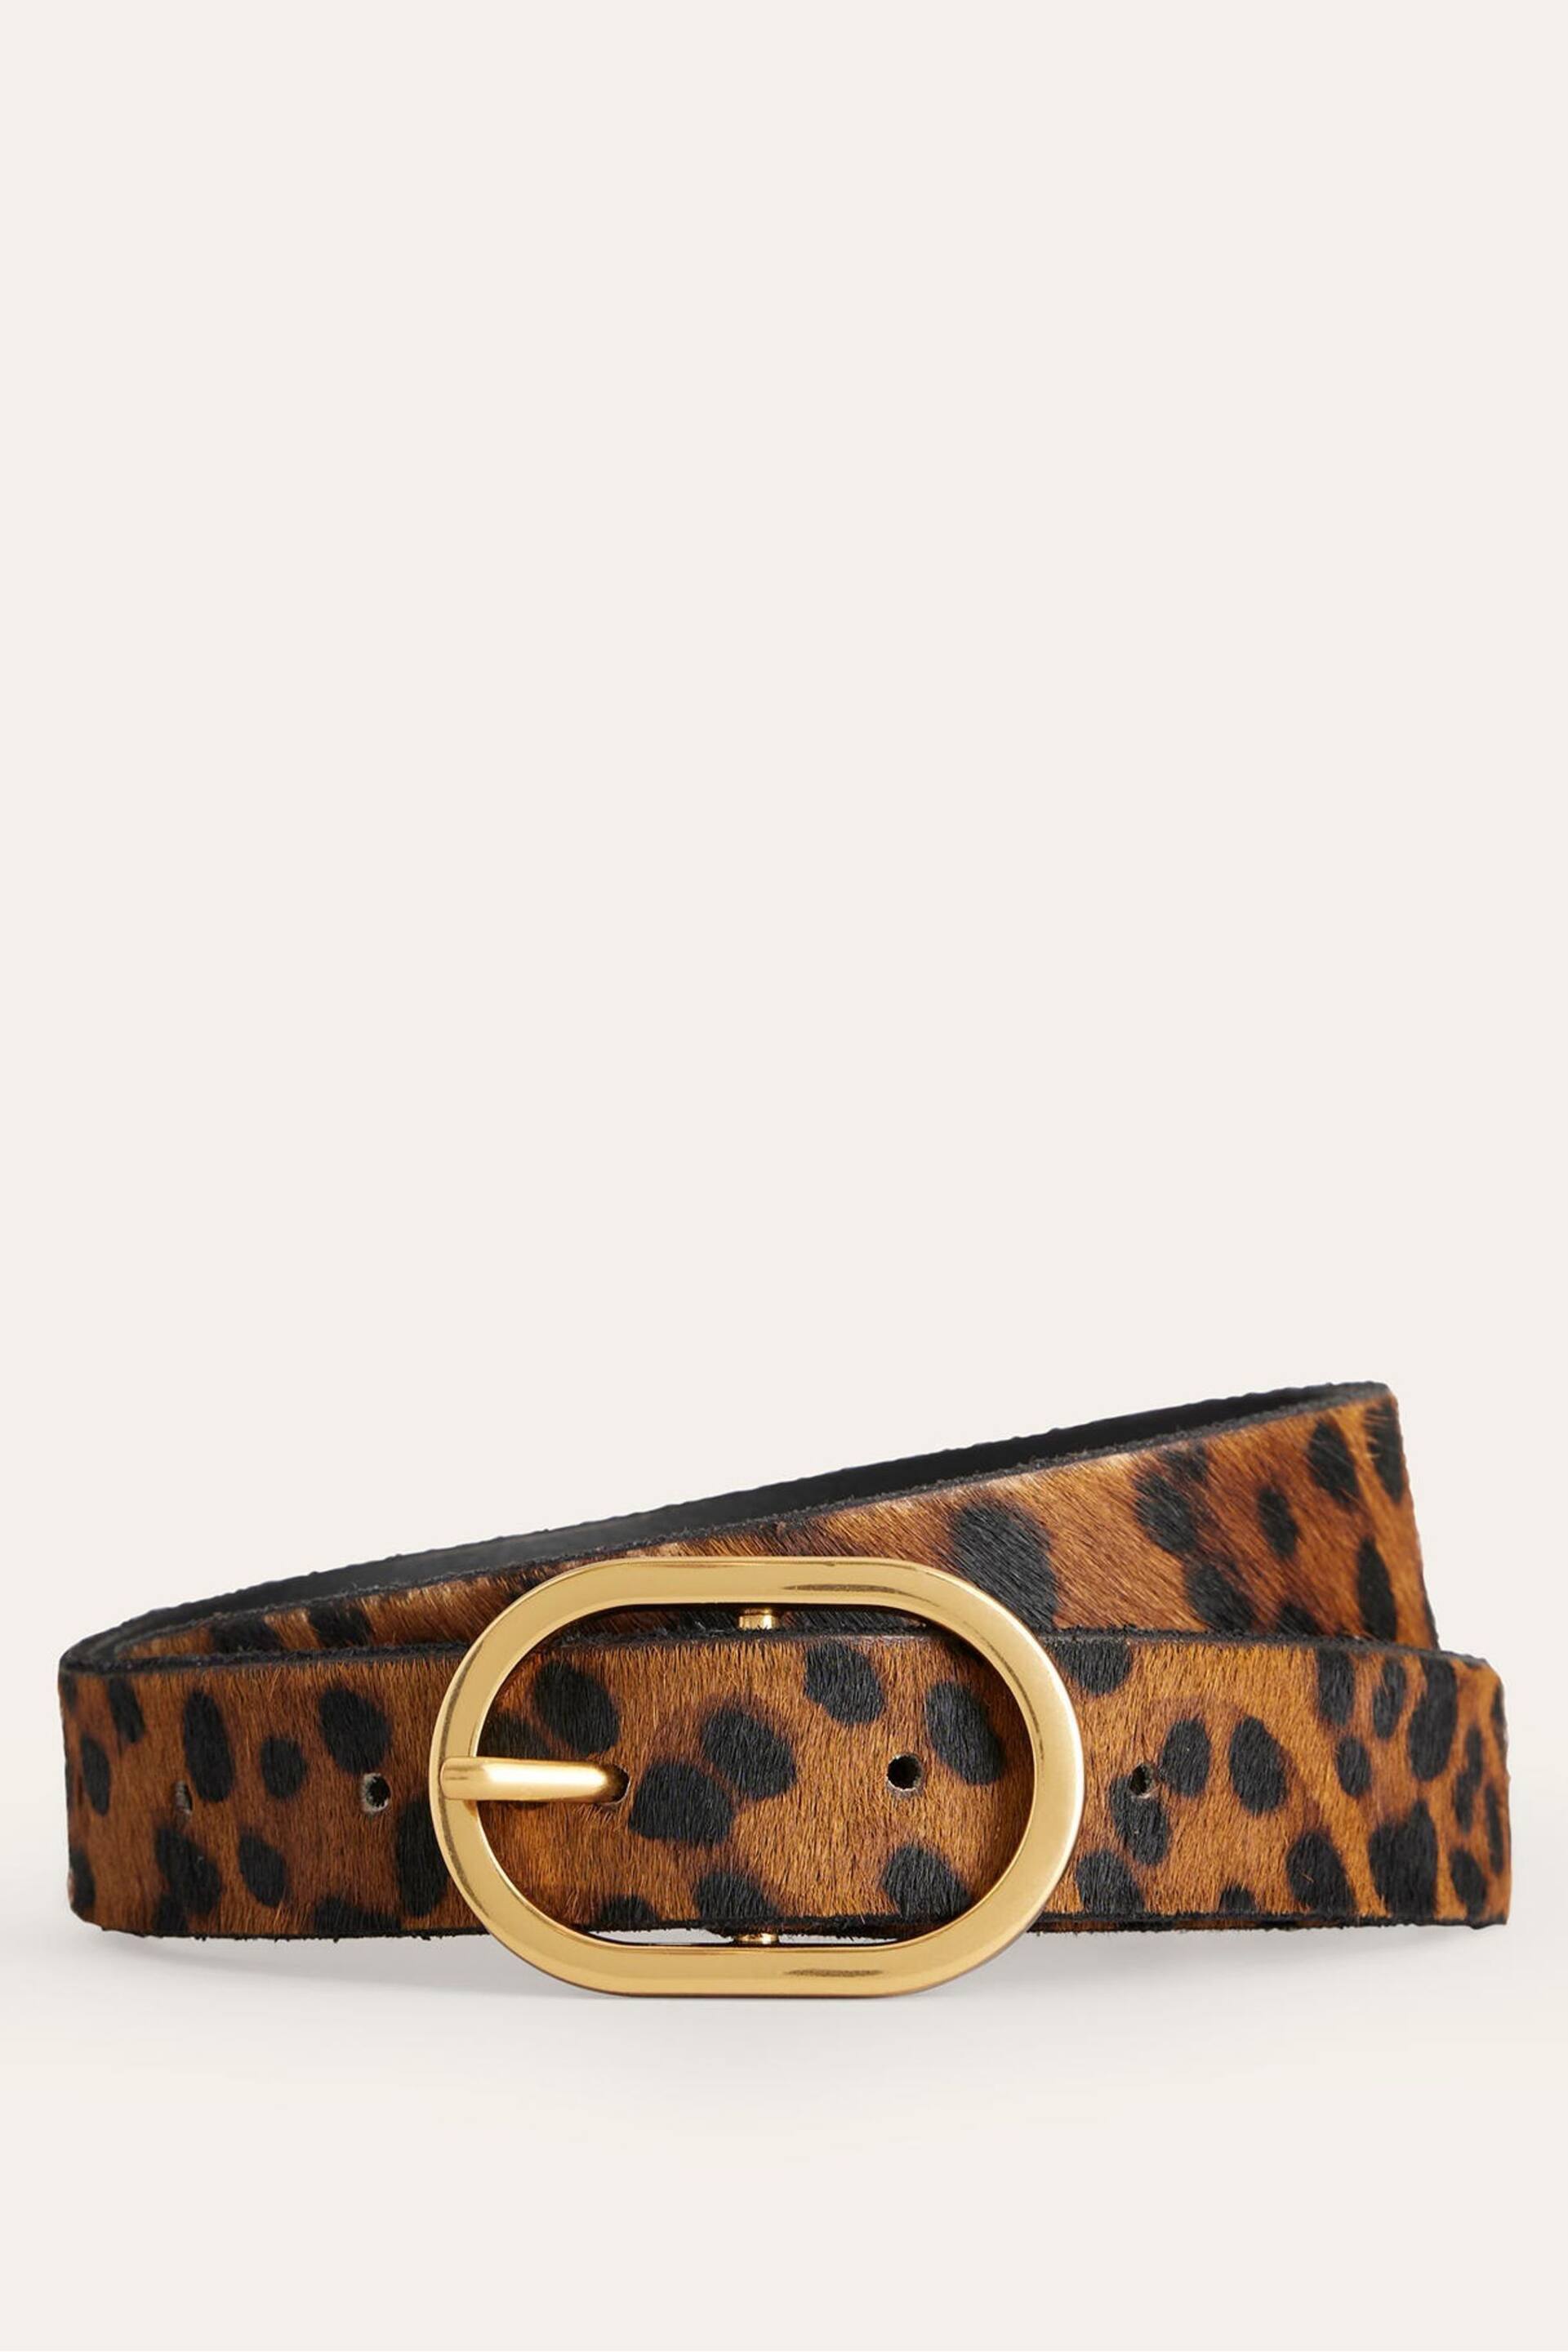 Boden Light Brown Classic Leather Belt - Image 2 of 3